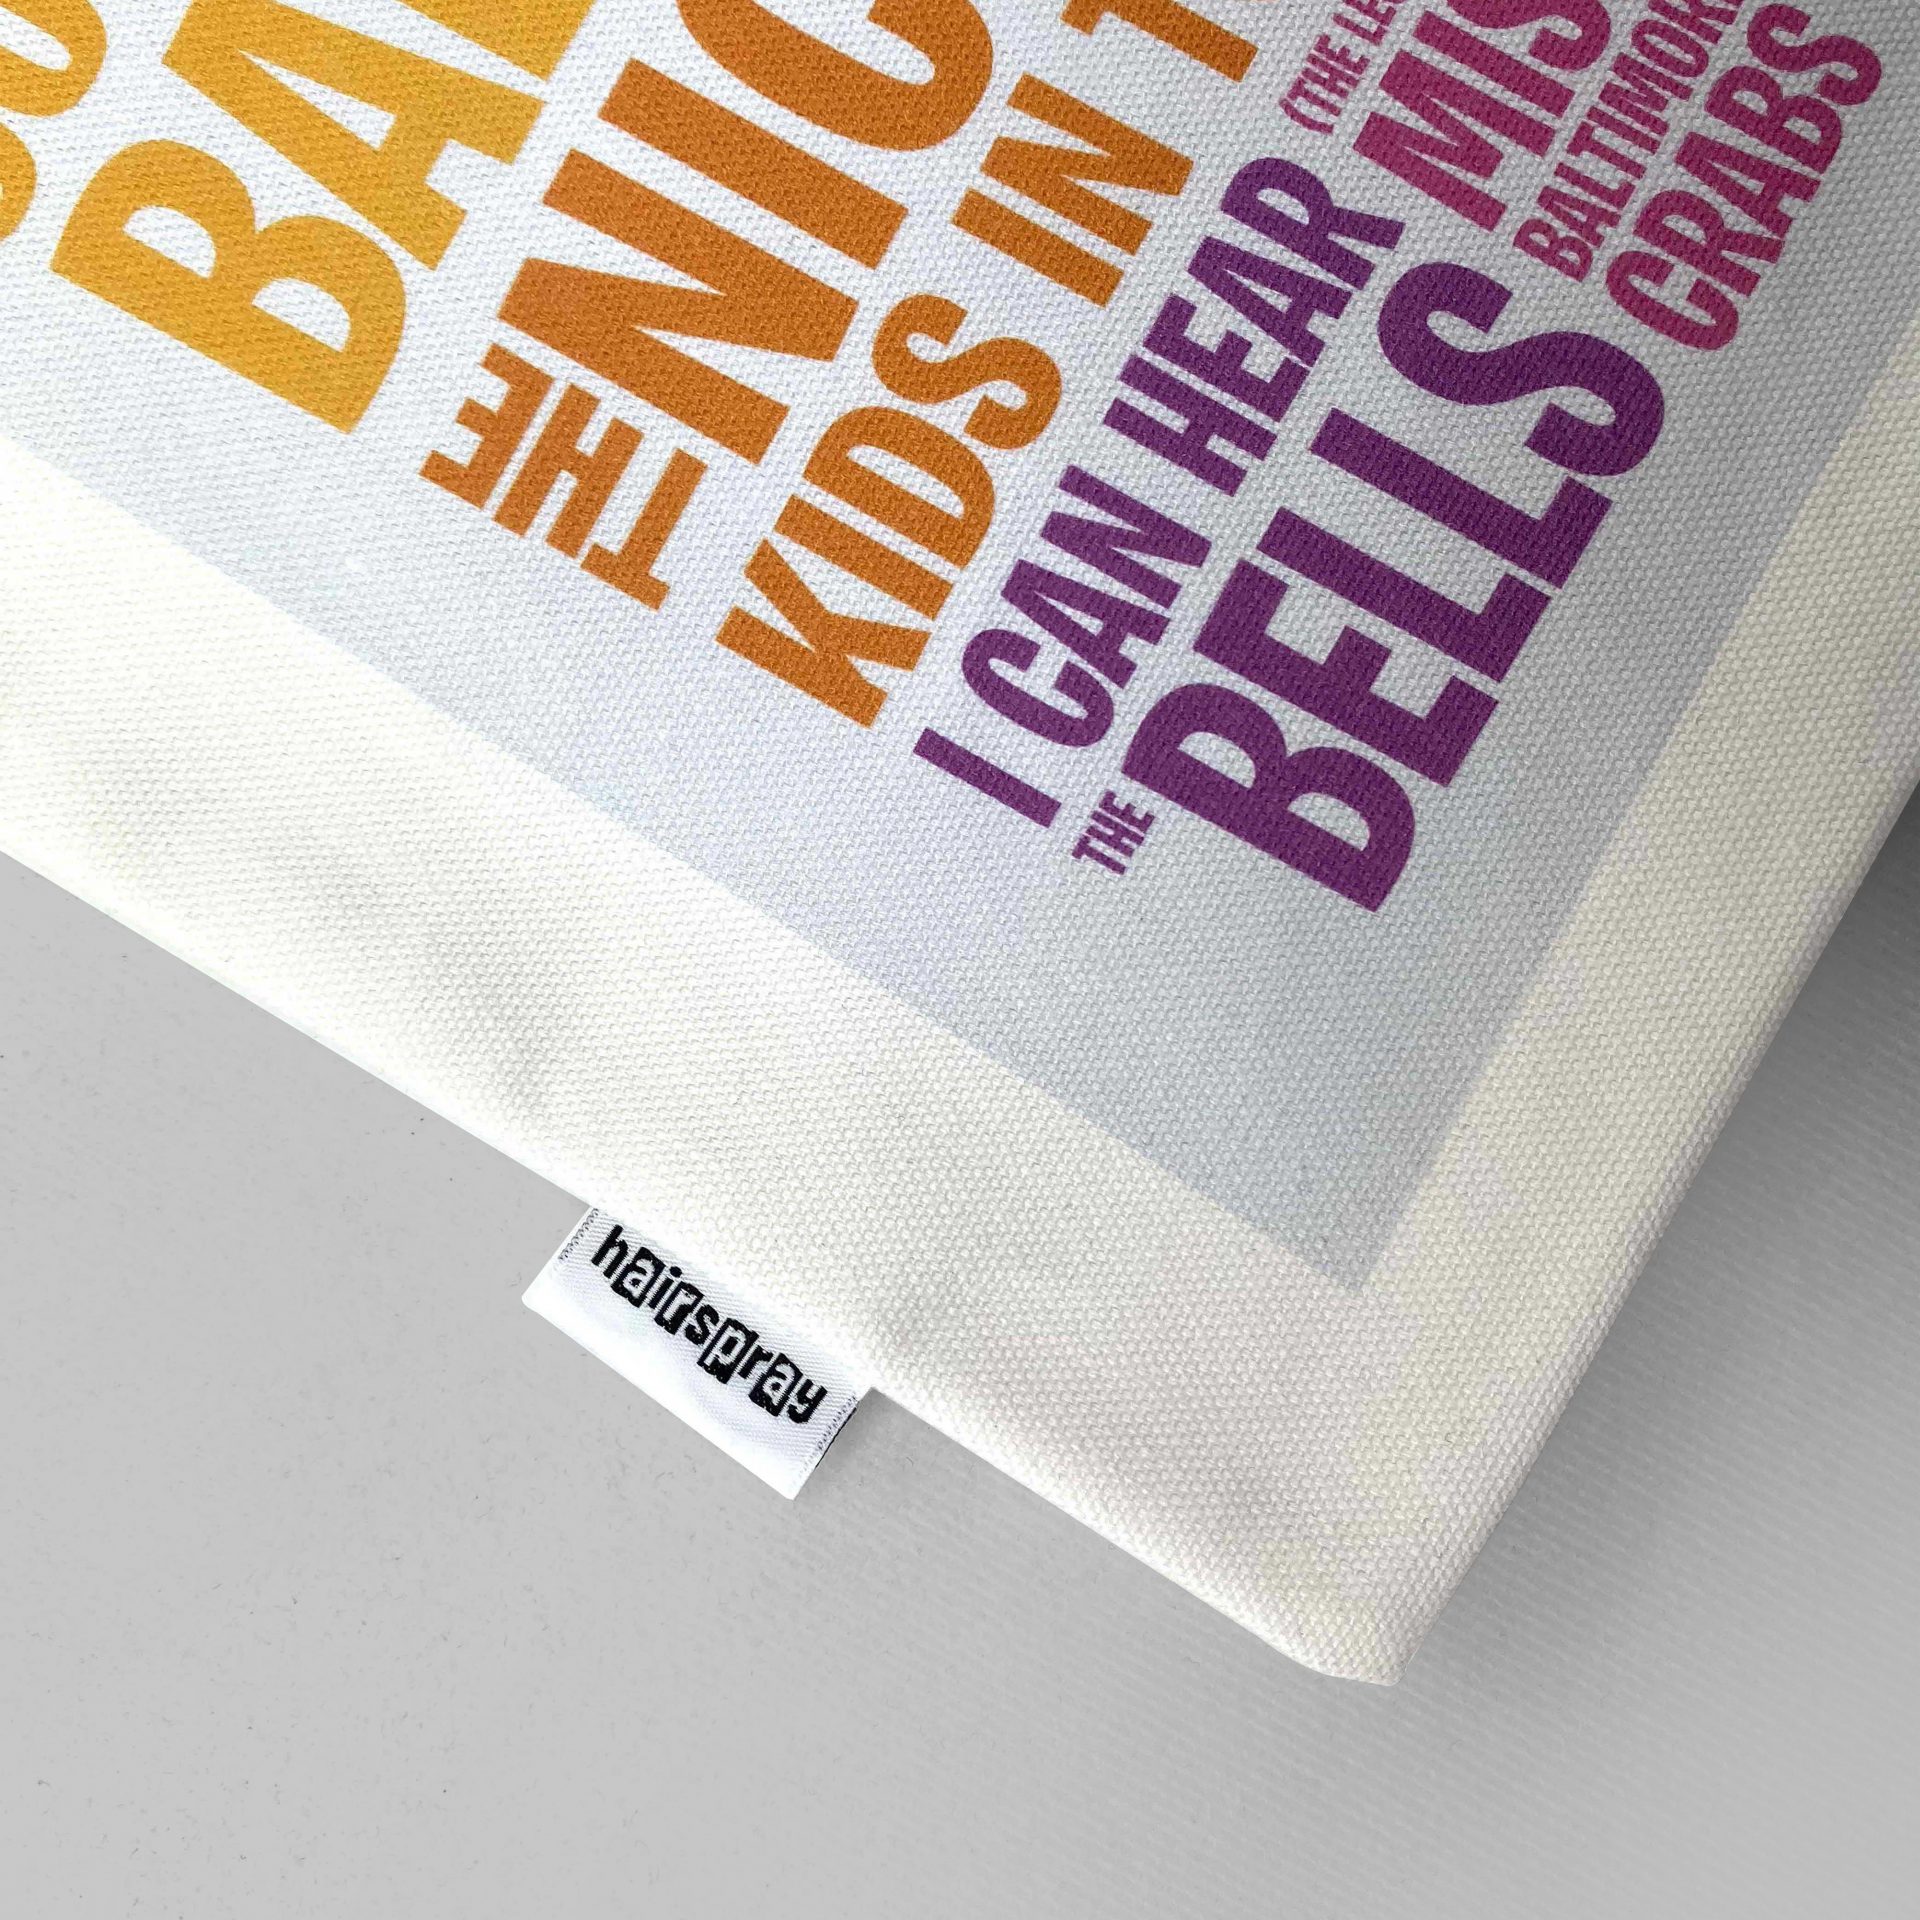 Branded woven labels in tote bags by Paul Bristow